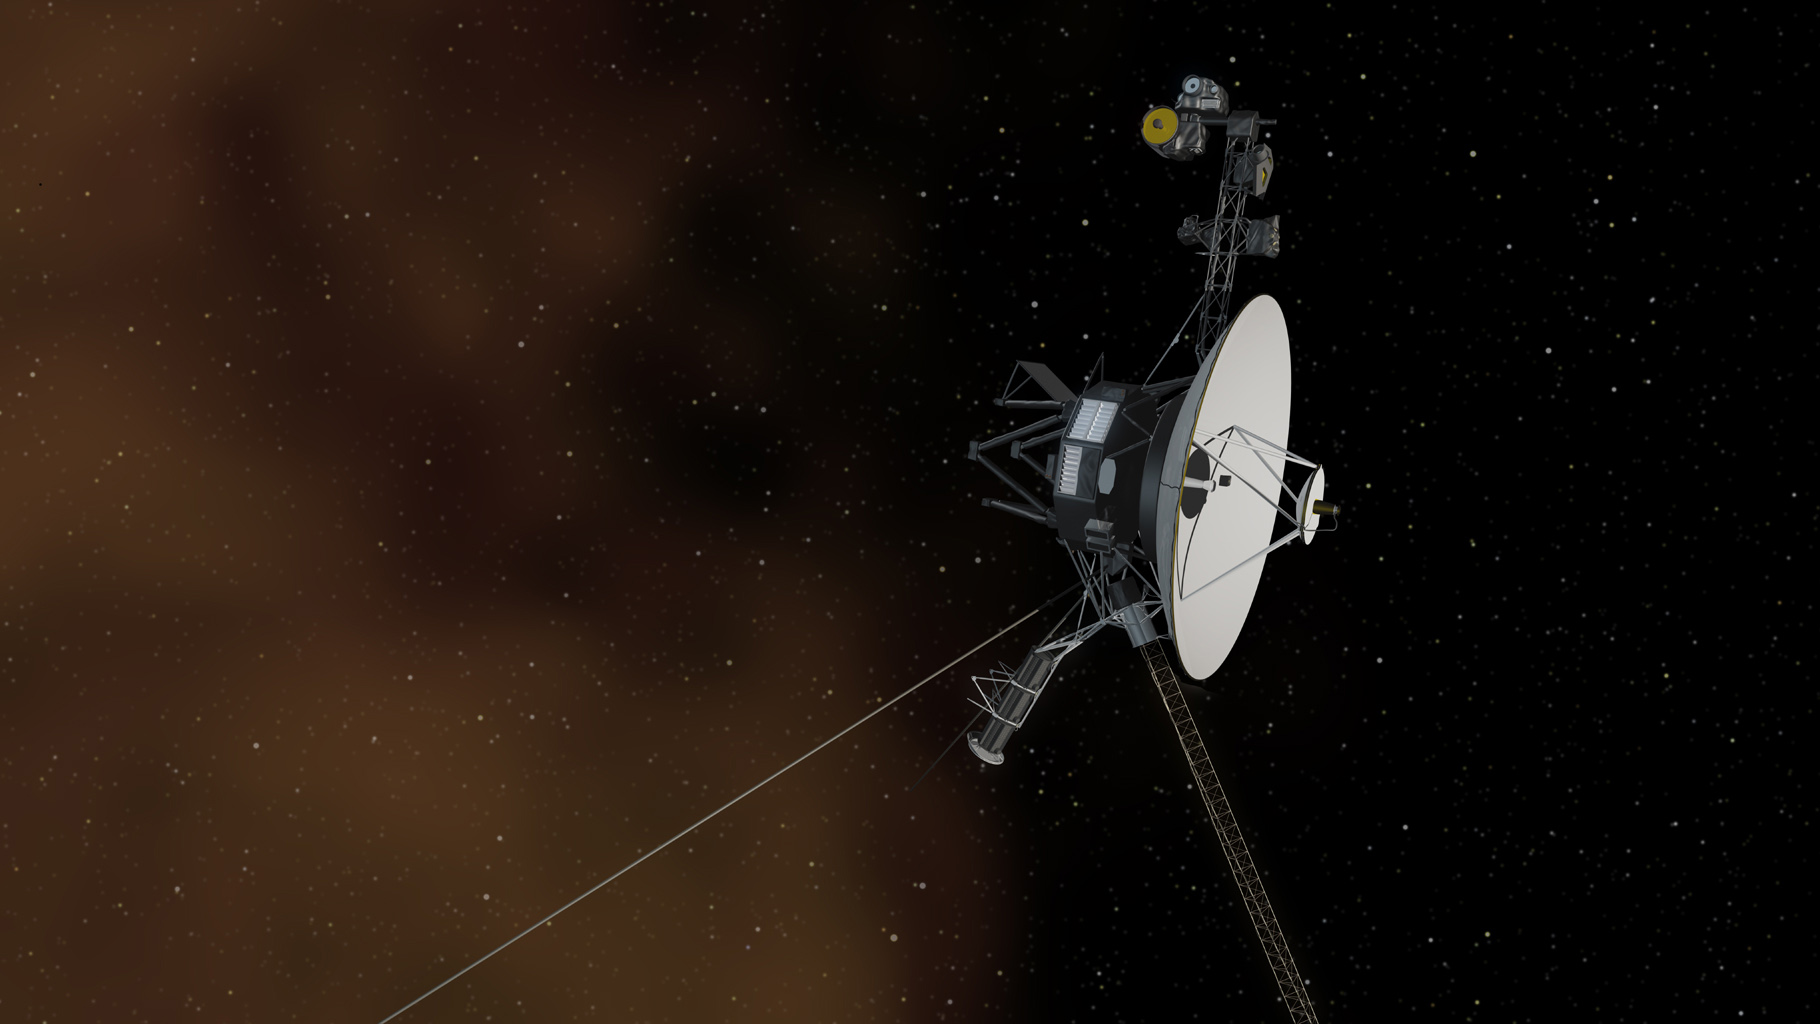 NASA Voyager 2 spacecraft extends its interstellar science mission for 3 more years